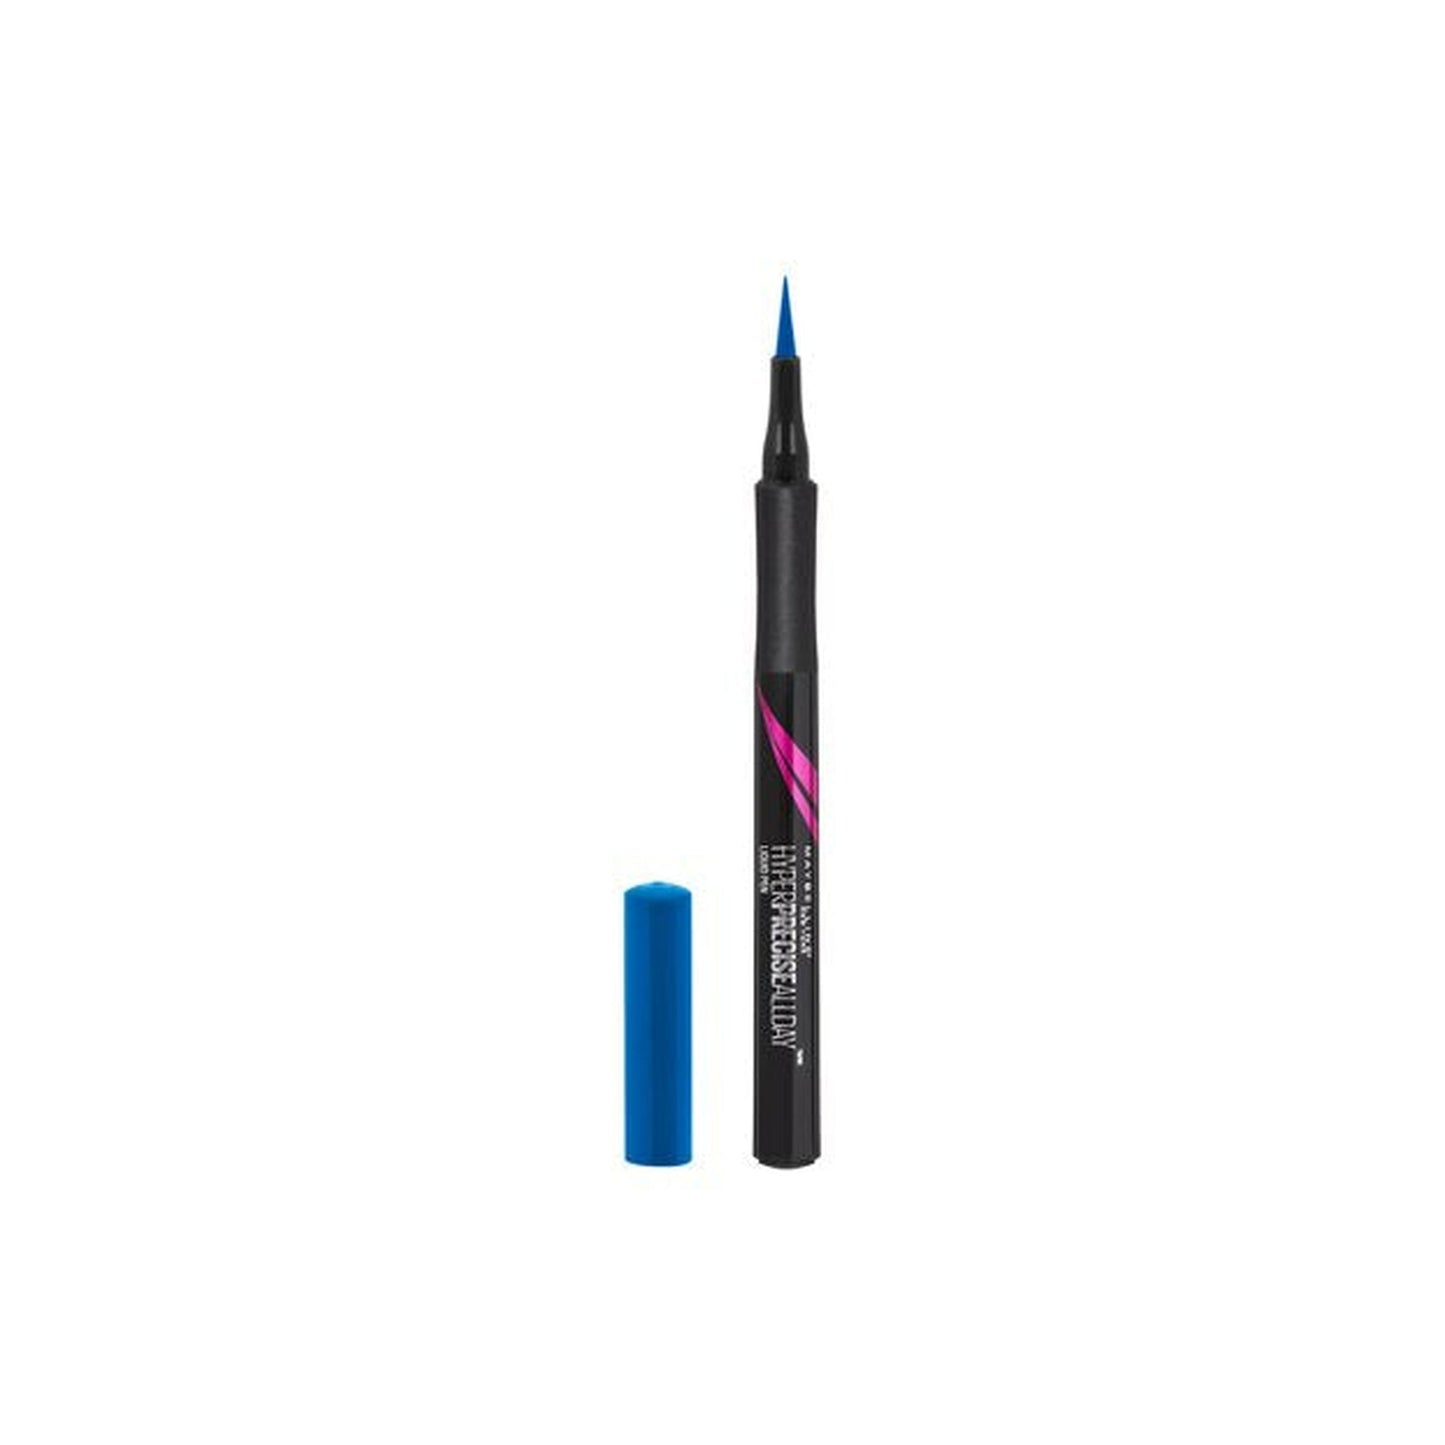 Maybelline Hyper Precise All Day Liquid Eyeliner - Sapphire Blue-Maybelline-BeautyNmakeup.co.uk